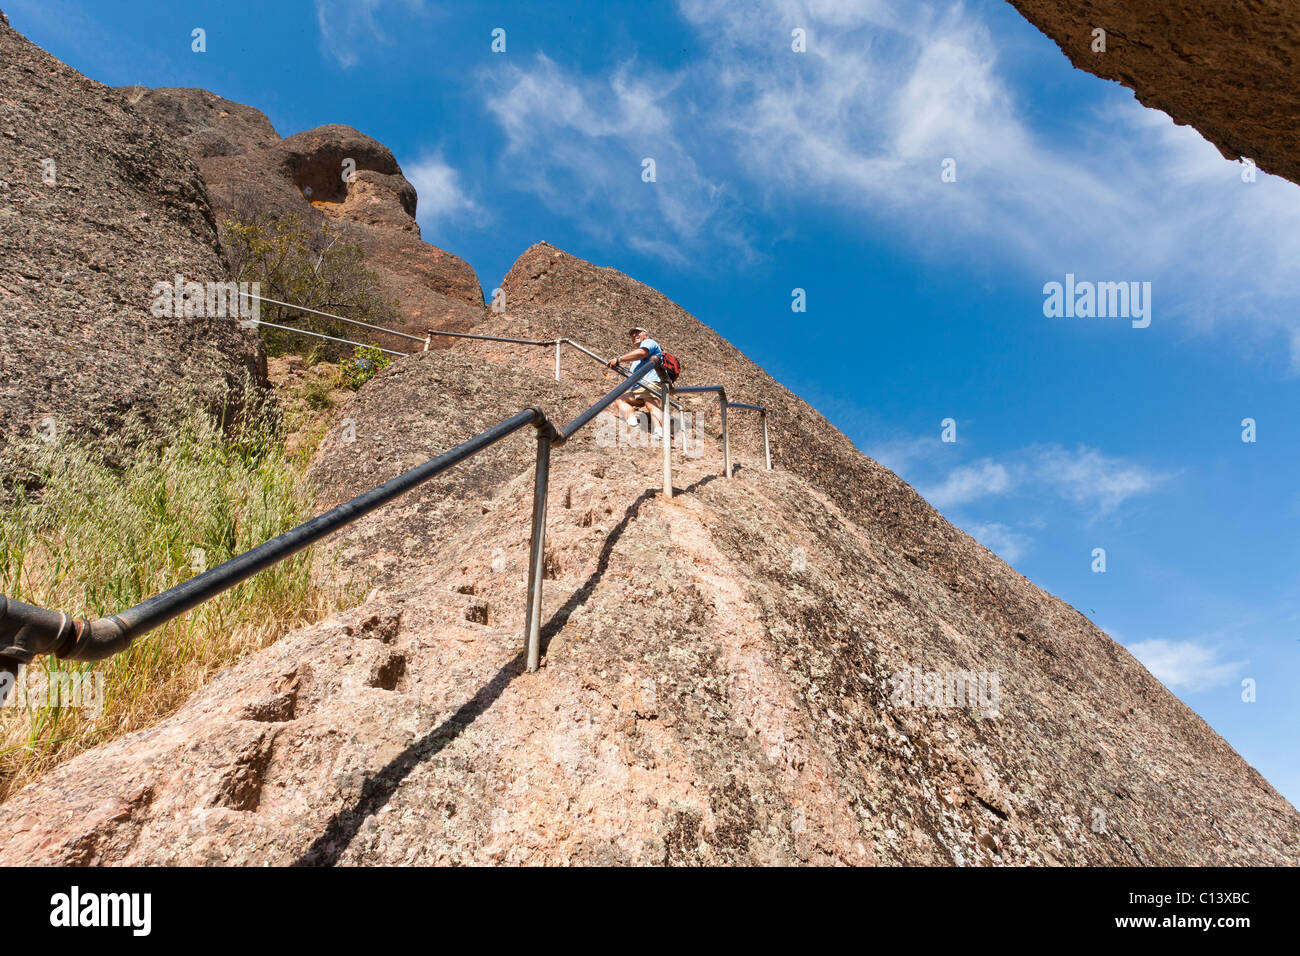 Rock formations at Pinnacles National Monument near Soledad, California. Trail includes stairs, steps carved in stone. Stock Photo